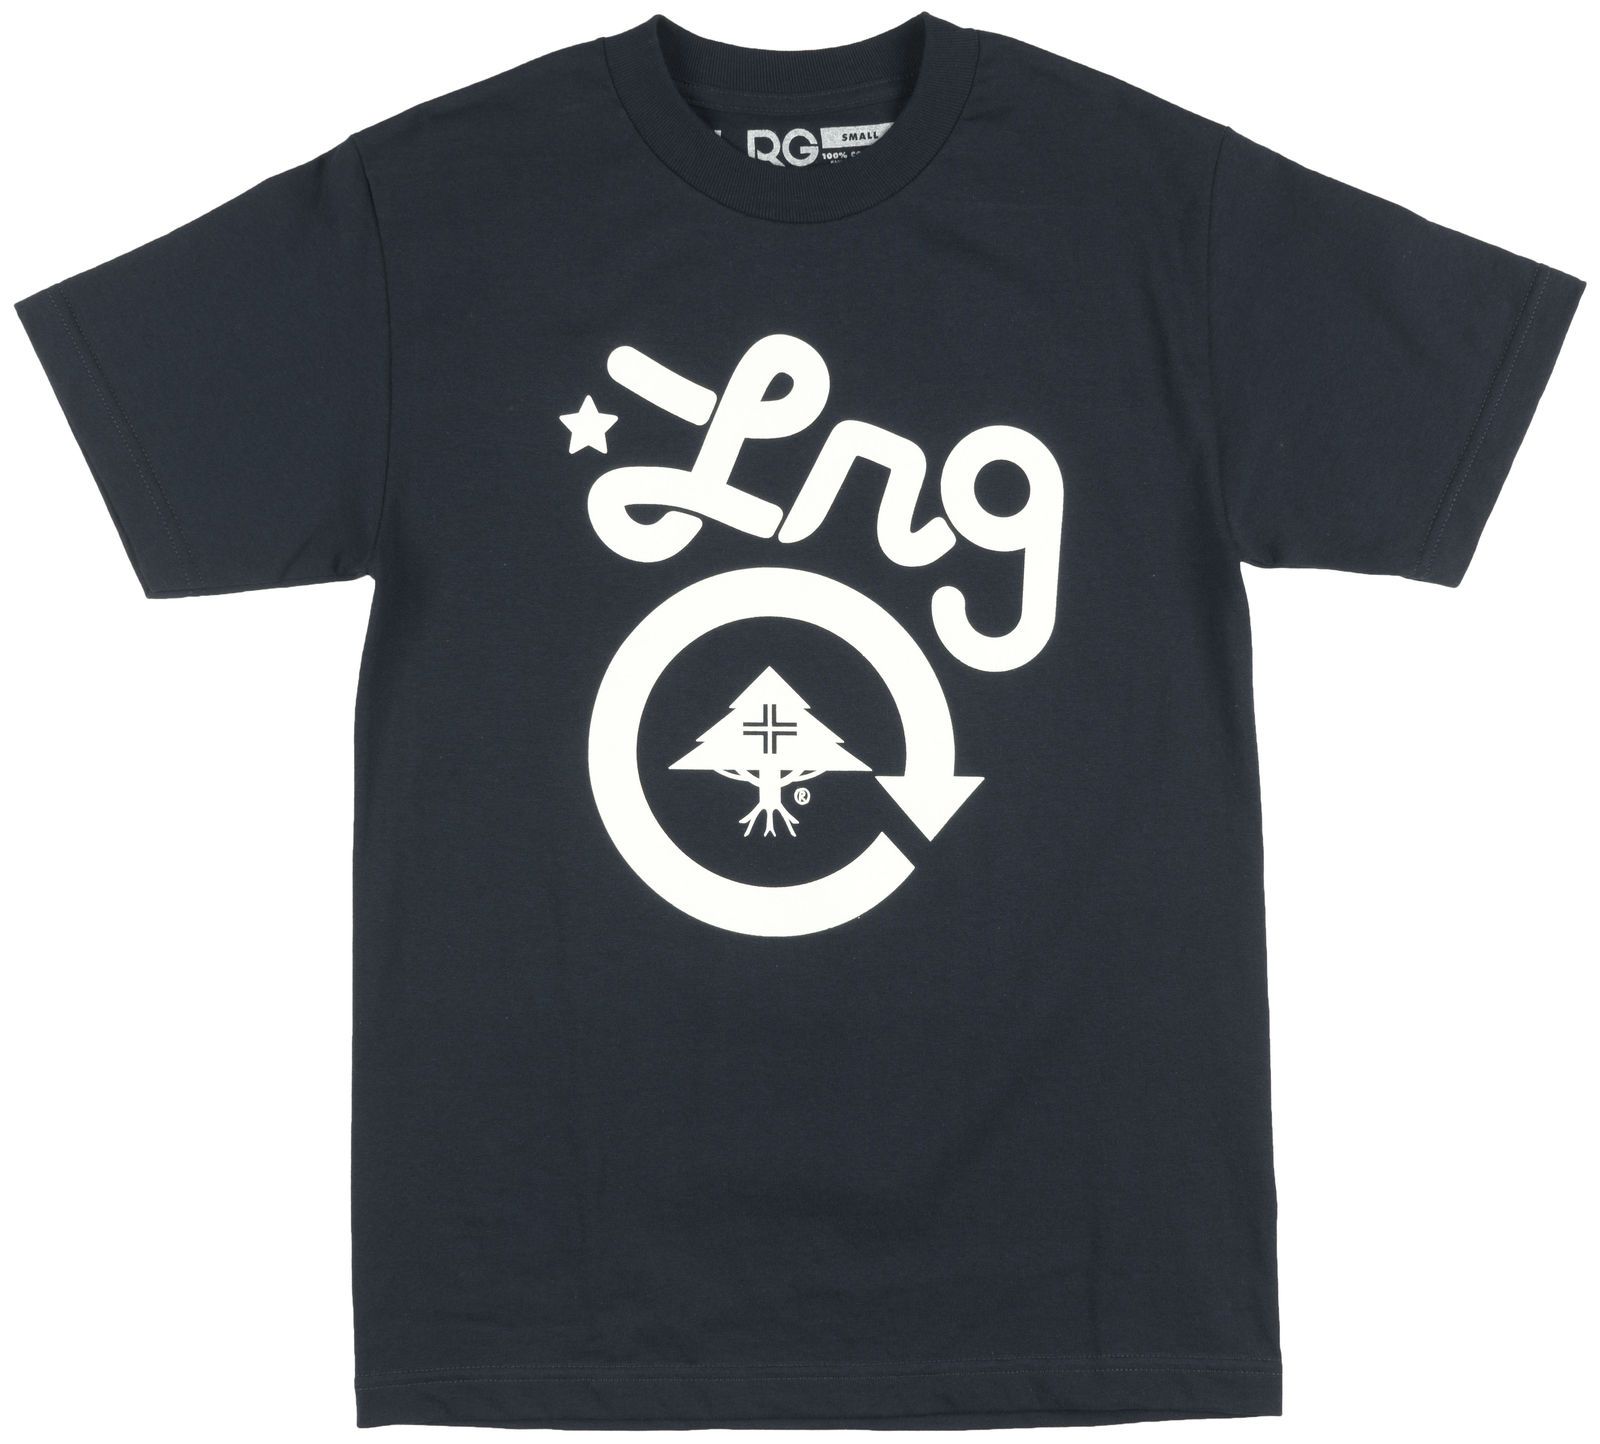 Details Zu Lifted Research Group Loop Logo Standard Fit T LRG Tee Top Fashion Navy Funny Unisex Casual Gift From Lukehappy11, $12.81 | DHgate.Com